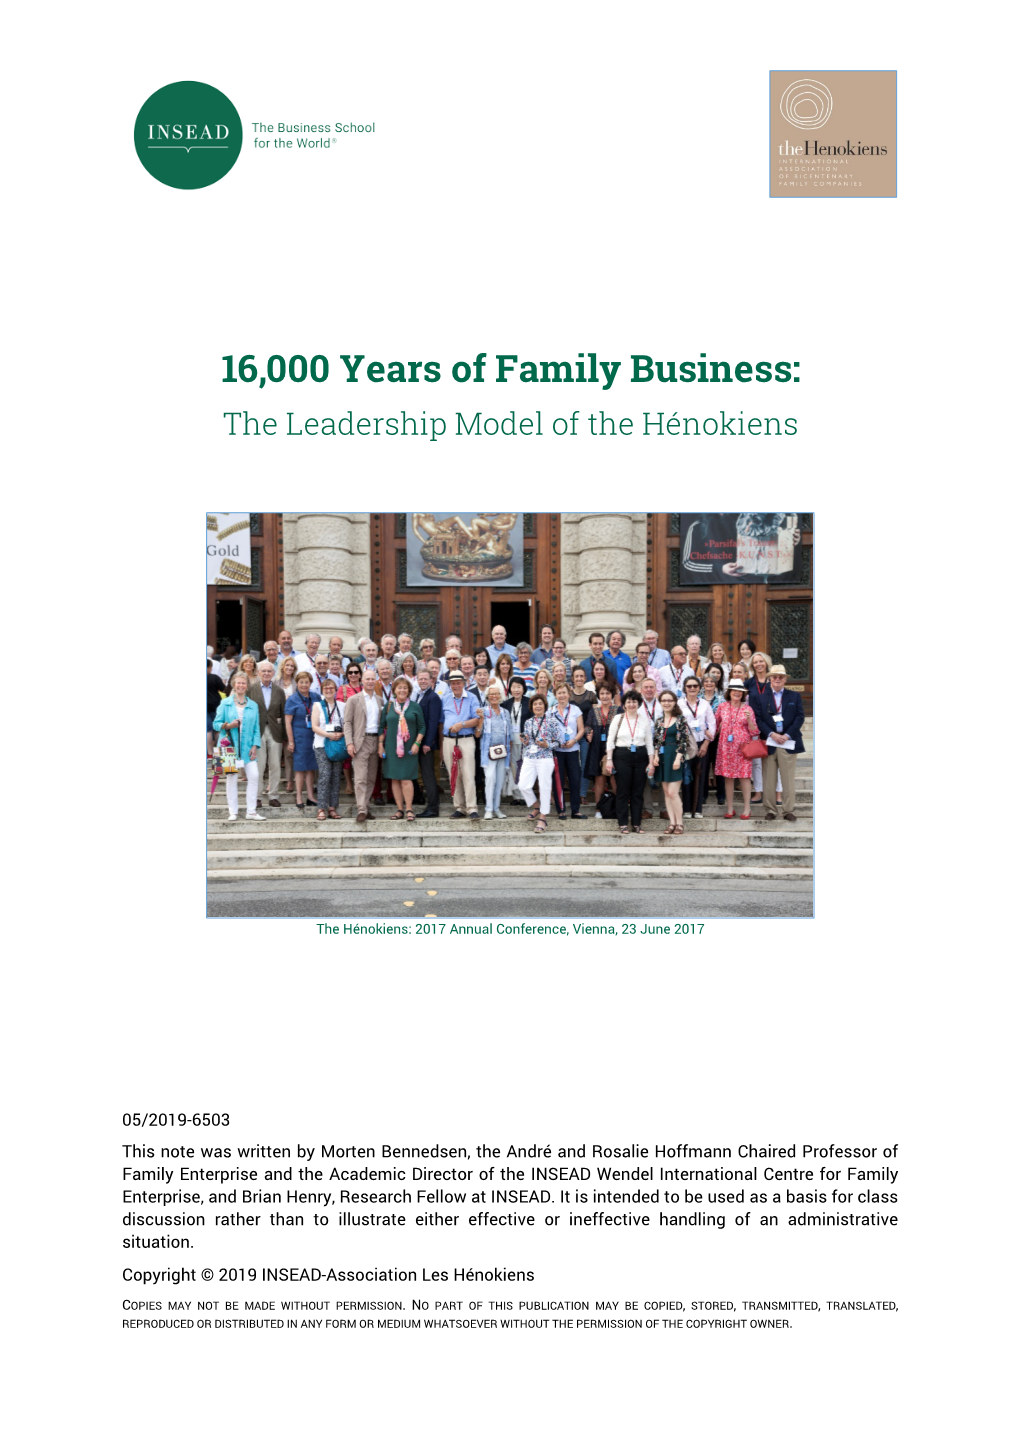 16,000 Years of Family Business: the Leadership Model of the Hénokiens